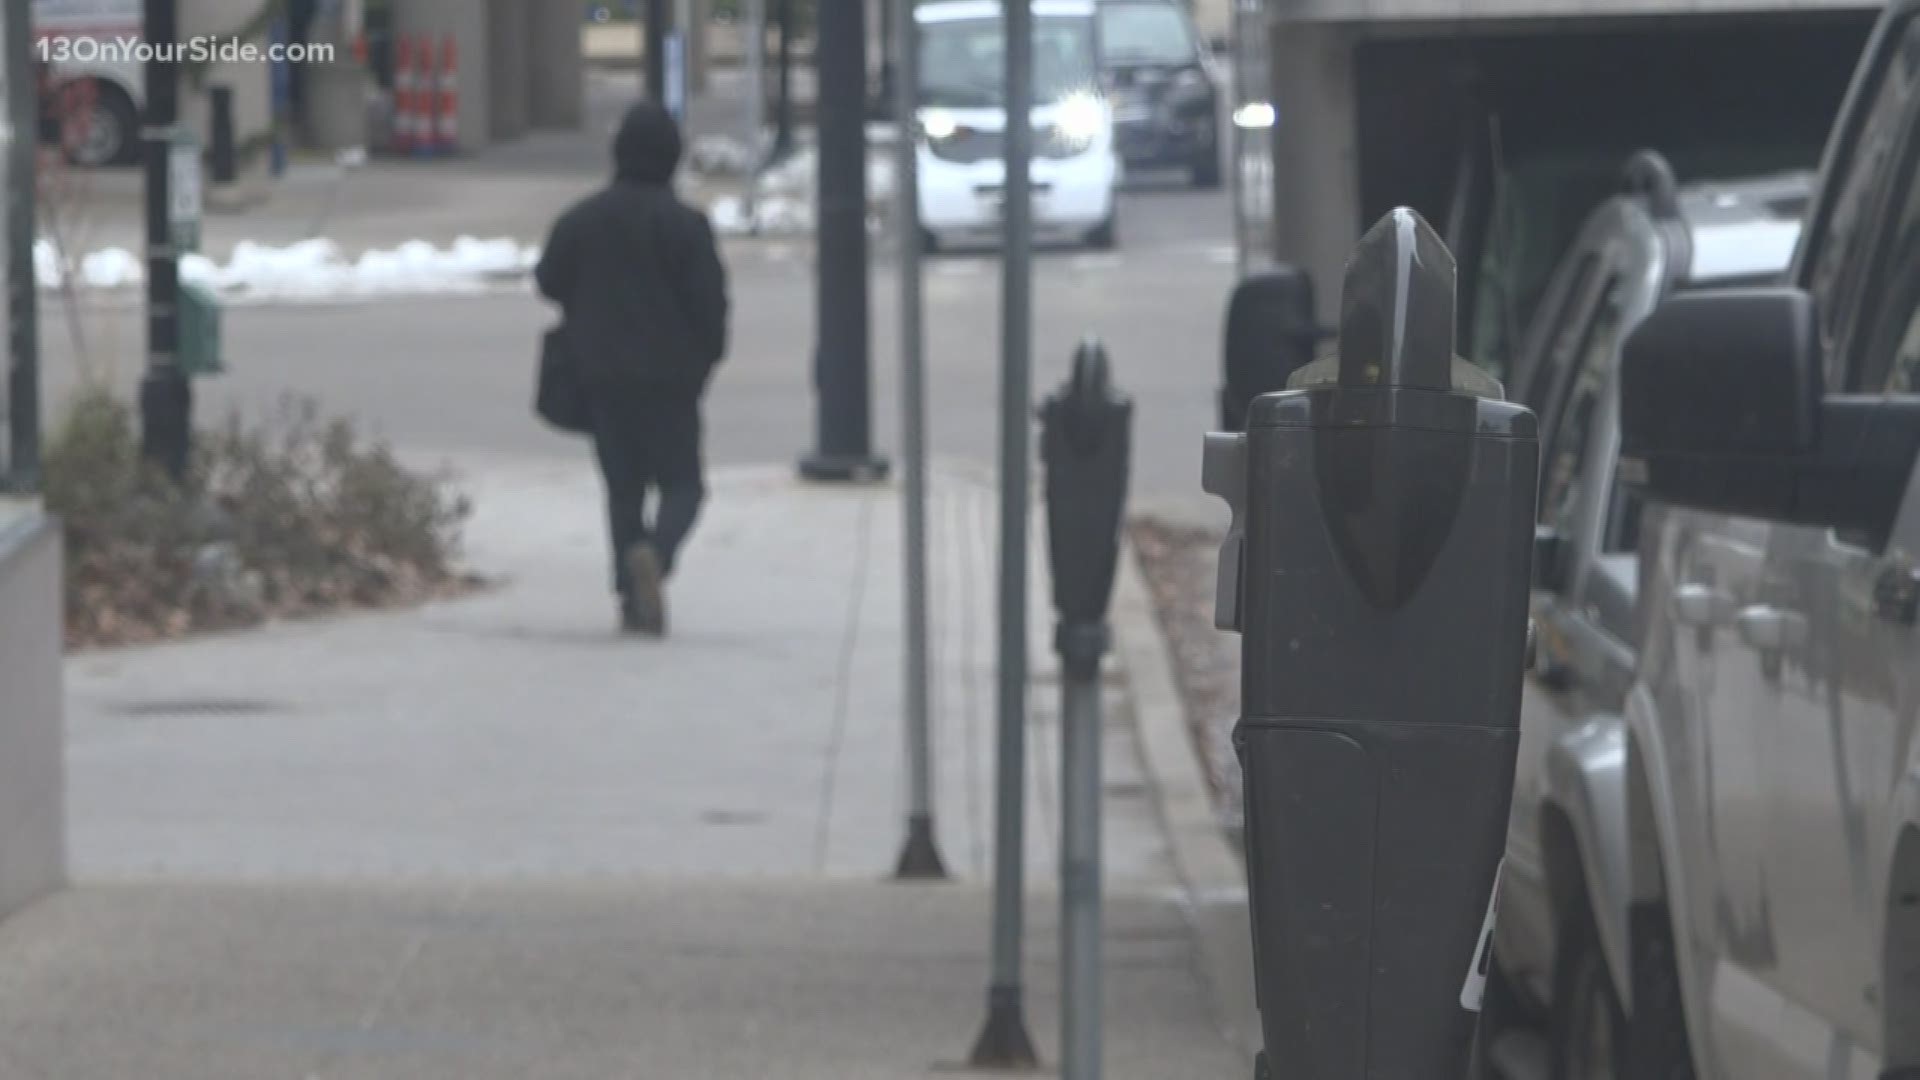 The Motu parking app was brought to Grand Rapids around one year ago, but now some users say they got wrongfully ticketed during their paid parking sessions.